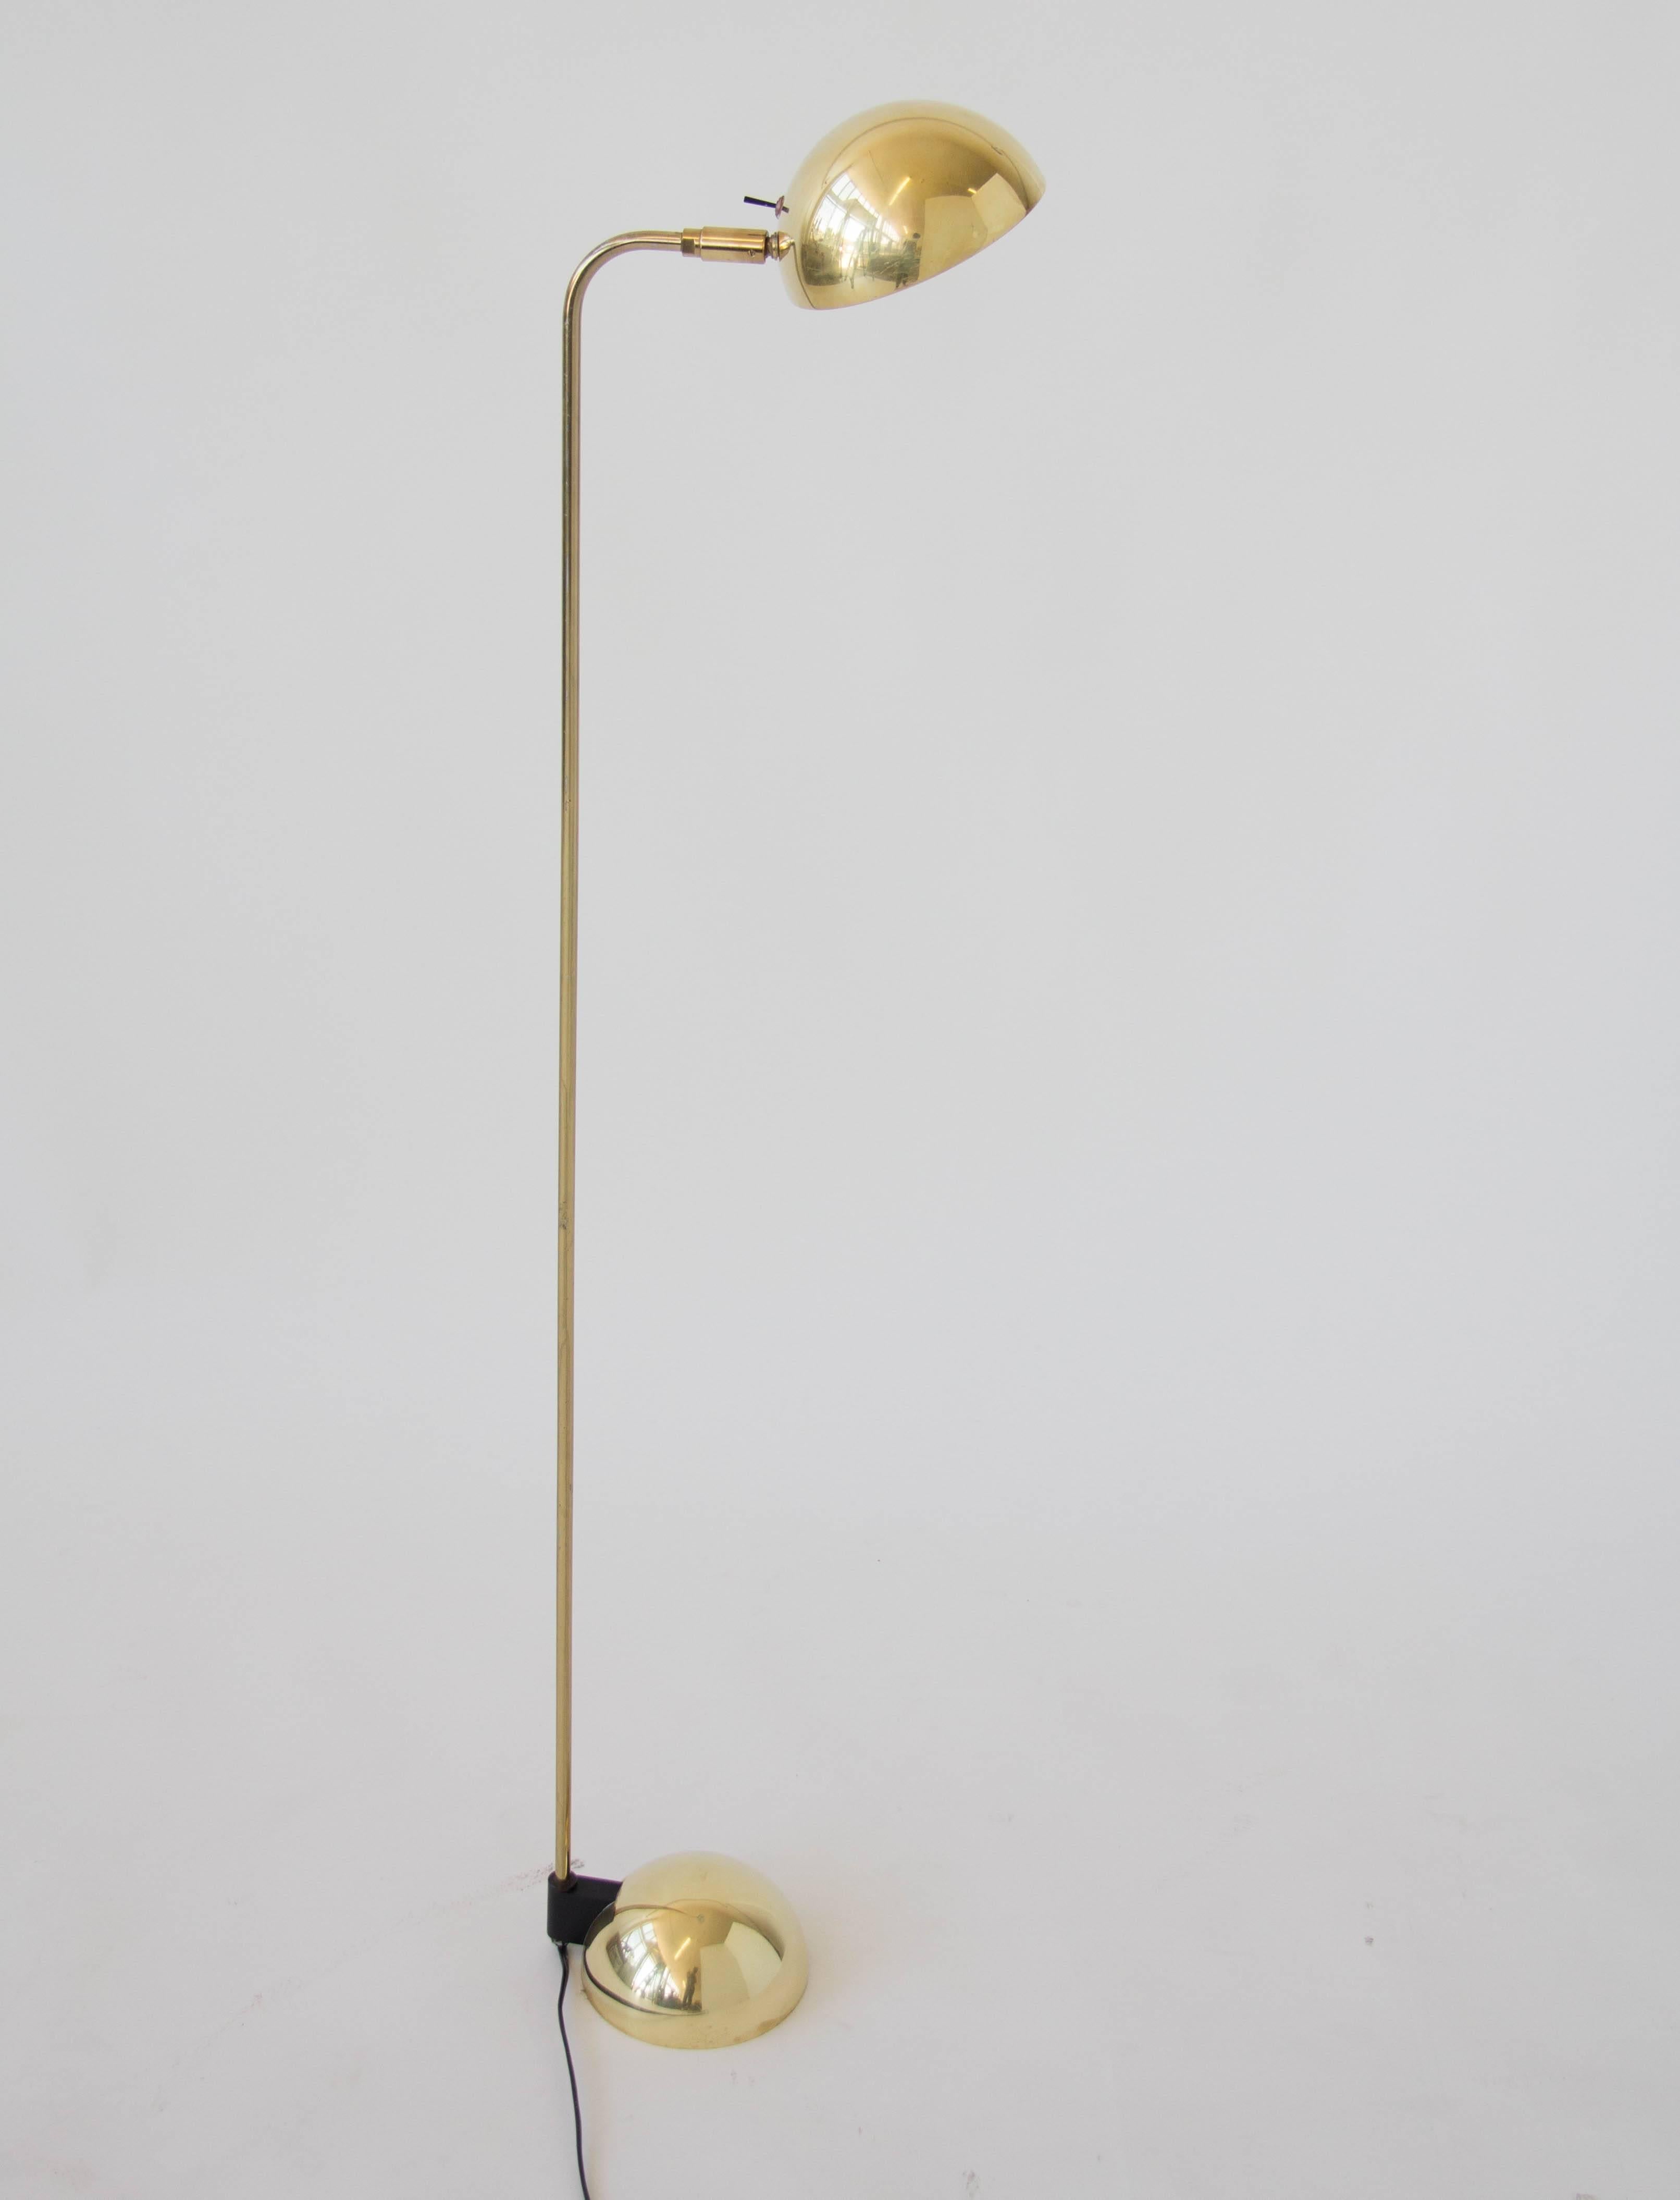 A 1987 design by Robert Sonneman for George Kovacs Lighting, this brass floor lamp features a fully pivoting half-sphere shade with a halogen bulb. A slightly curved arm of brass joins the shade to a similarly shaped base that contains the